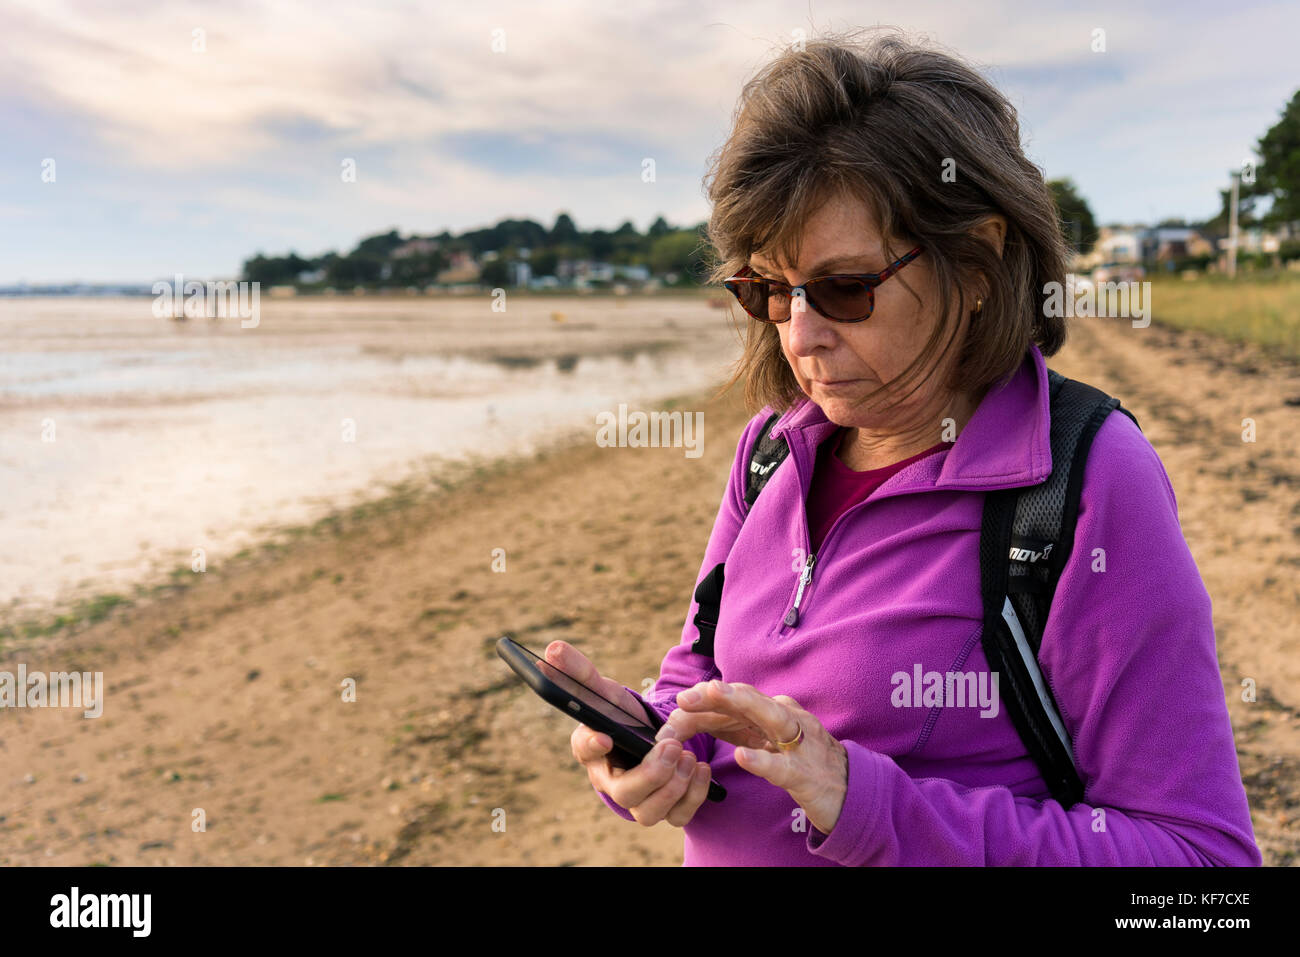 65 year old lady texting standing on a beach. Stock Photo